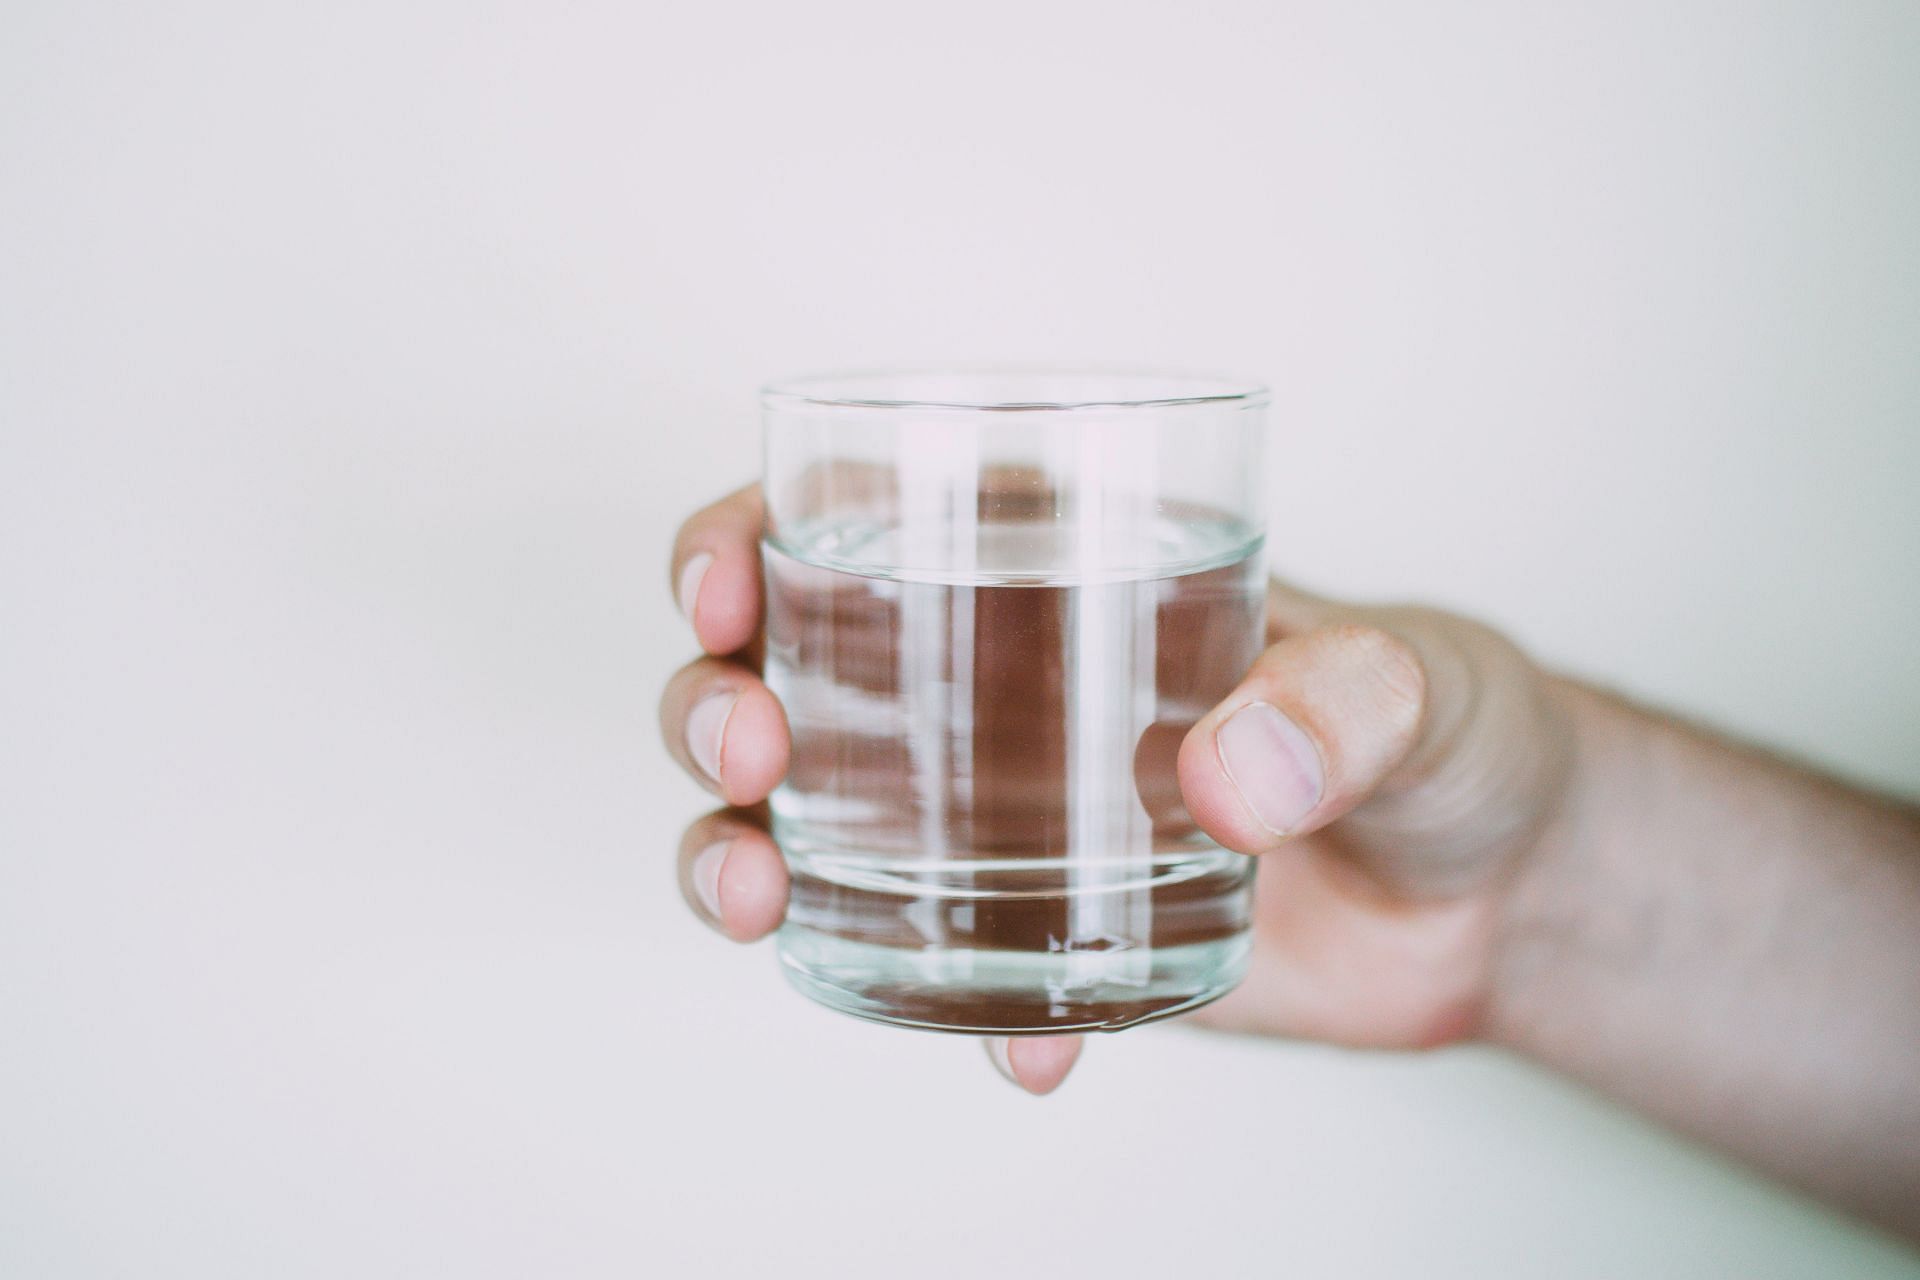 Drinking water is a fast weight loss tip (Image sourced via Pexels / Photo by fotios)